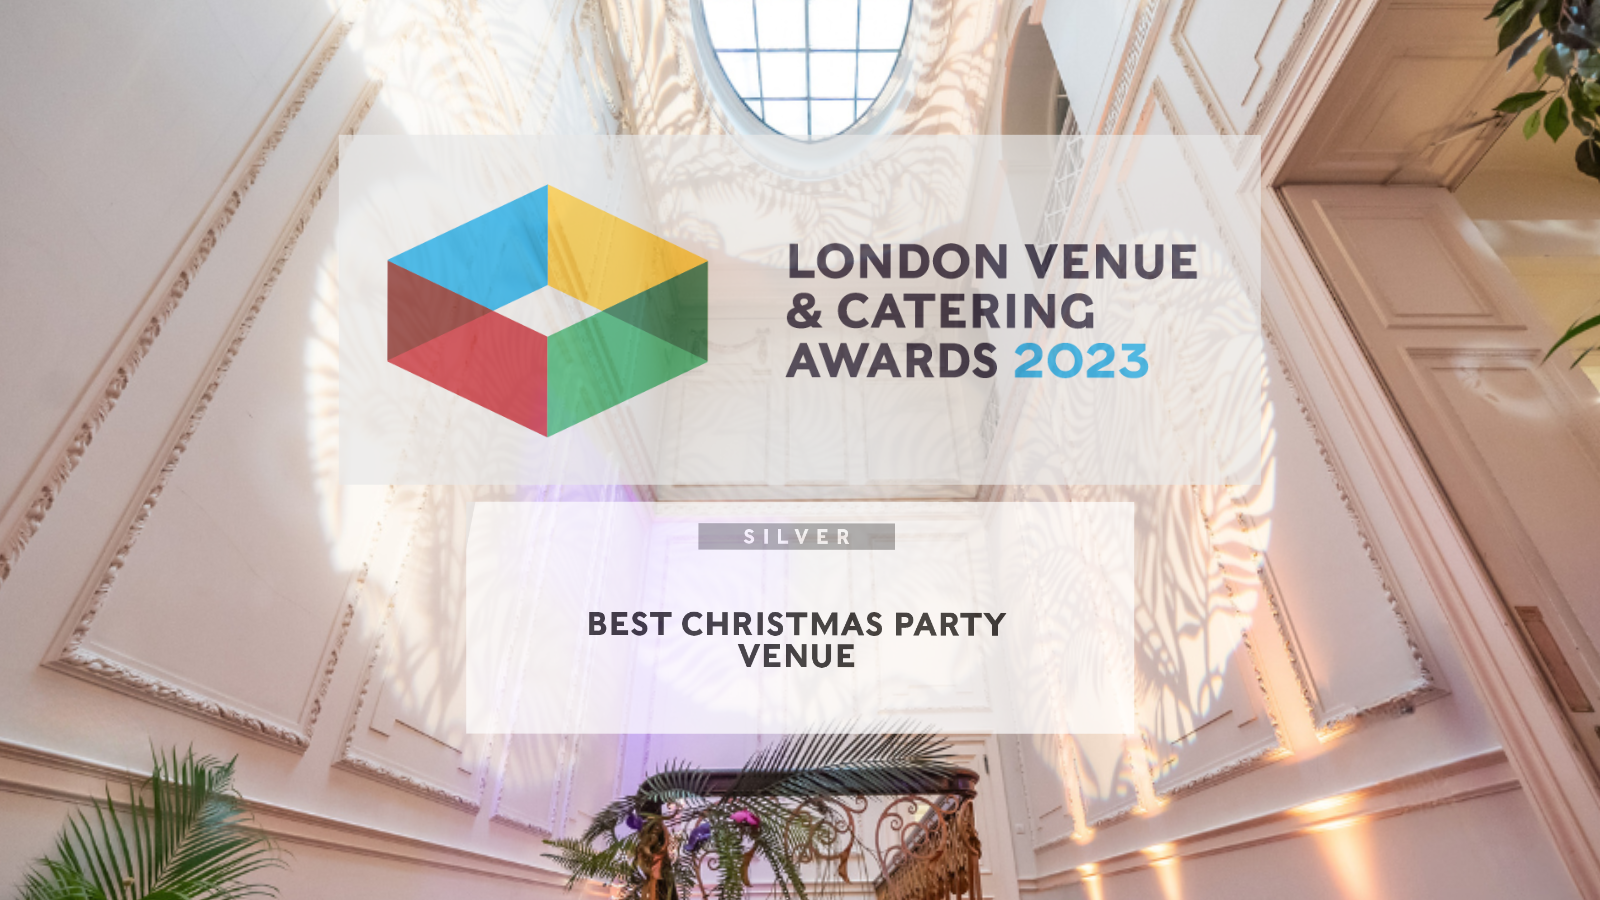 Kent House Knightsbridge shortlisted for Best Christmas Party Venue award